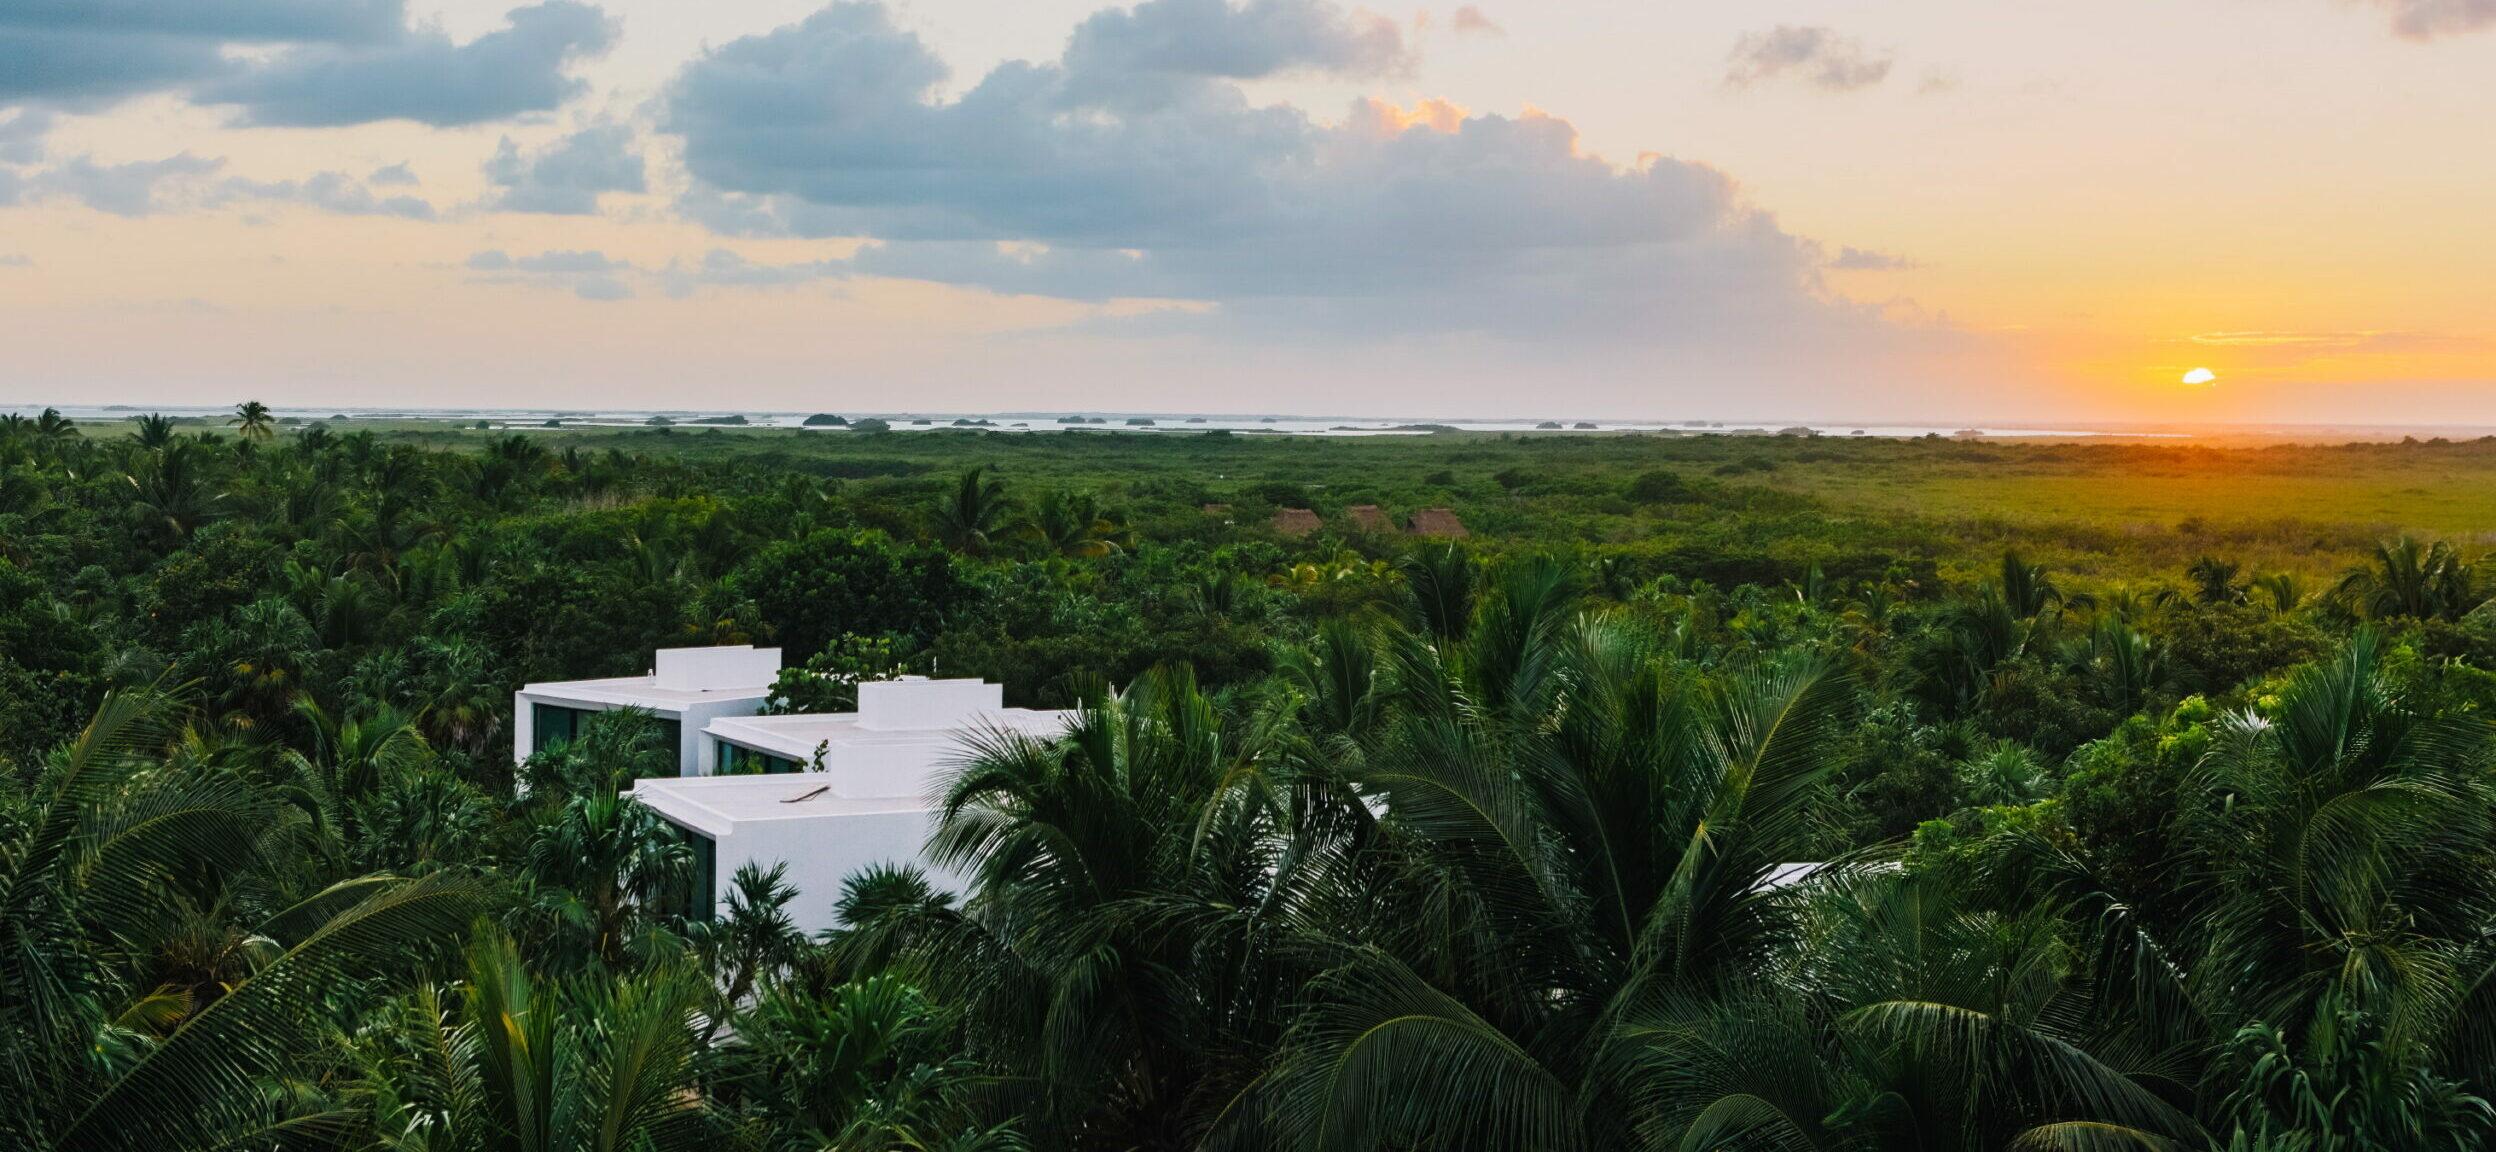 Pablo Escobar apos s former Tulum hideaway transformed into stunning beach-front hotel